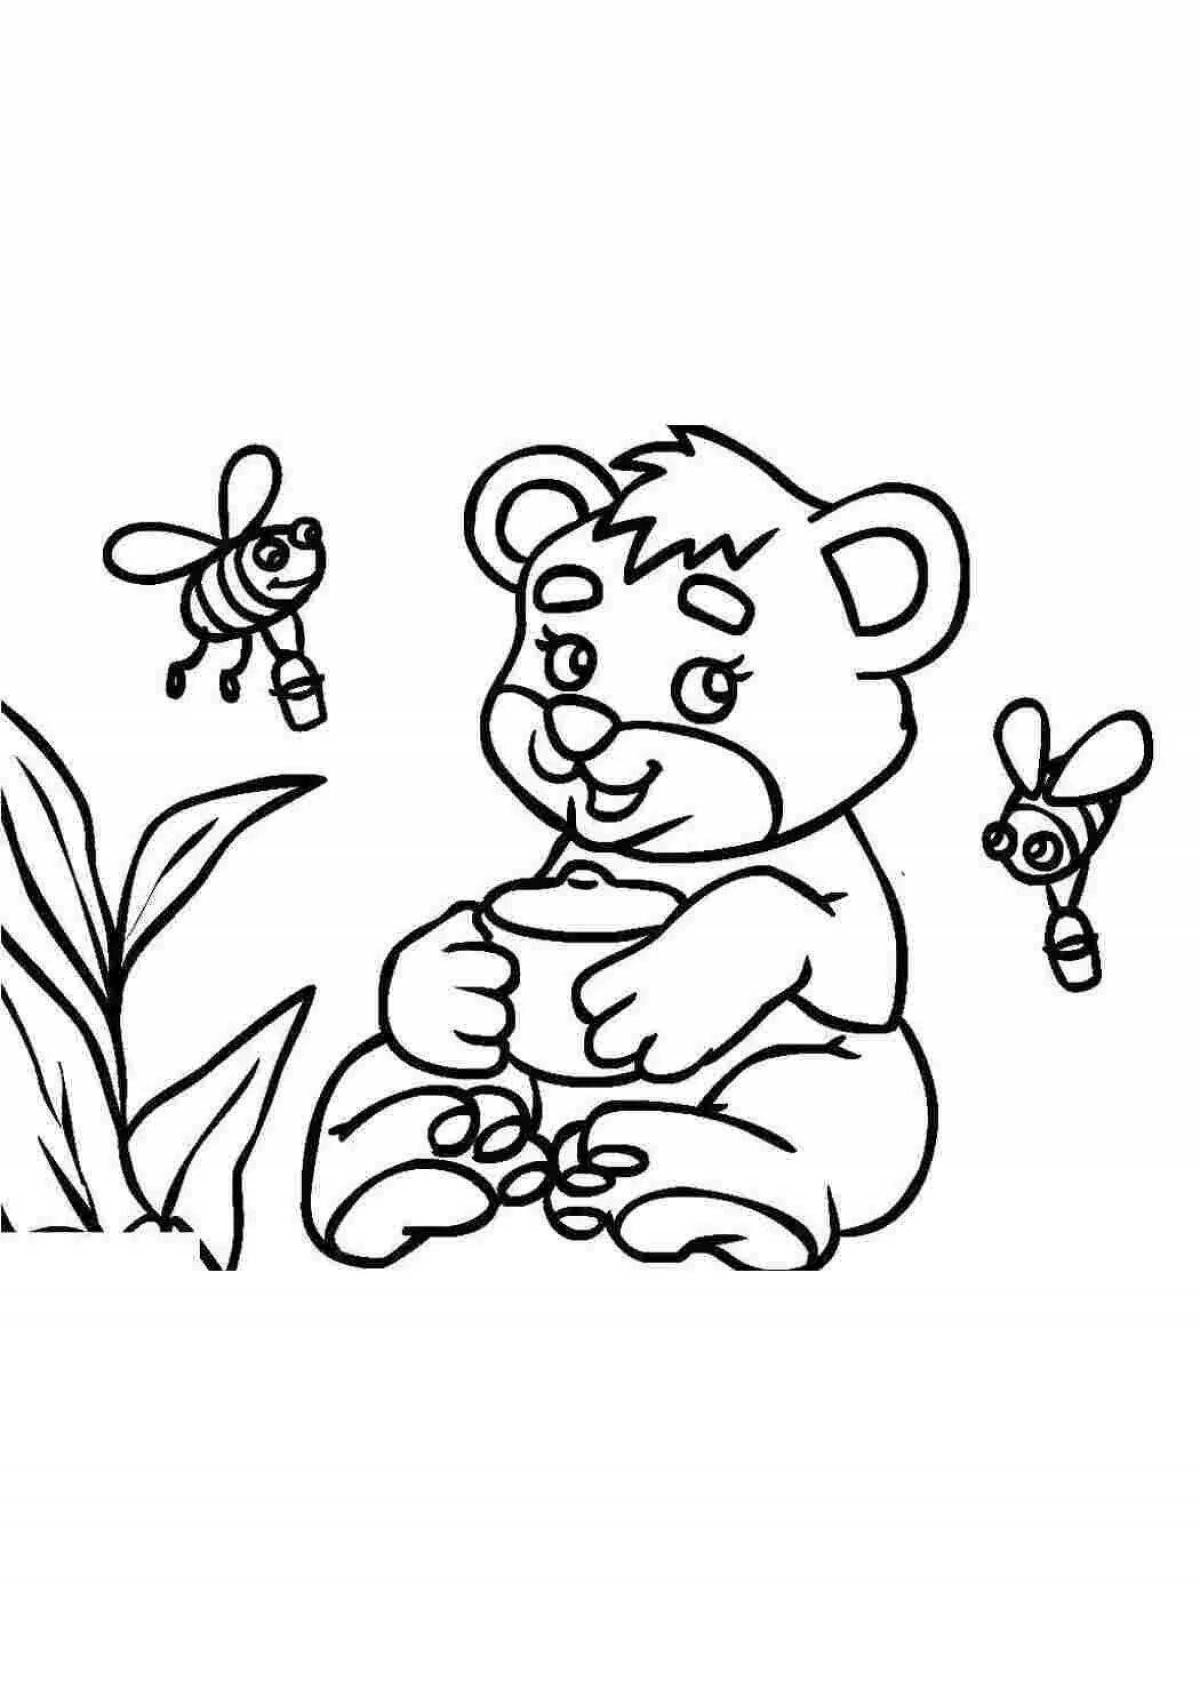 Playful bear with honey coloring book